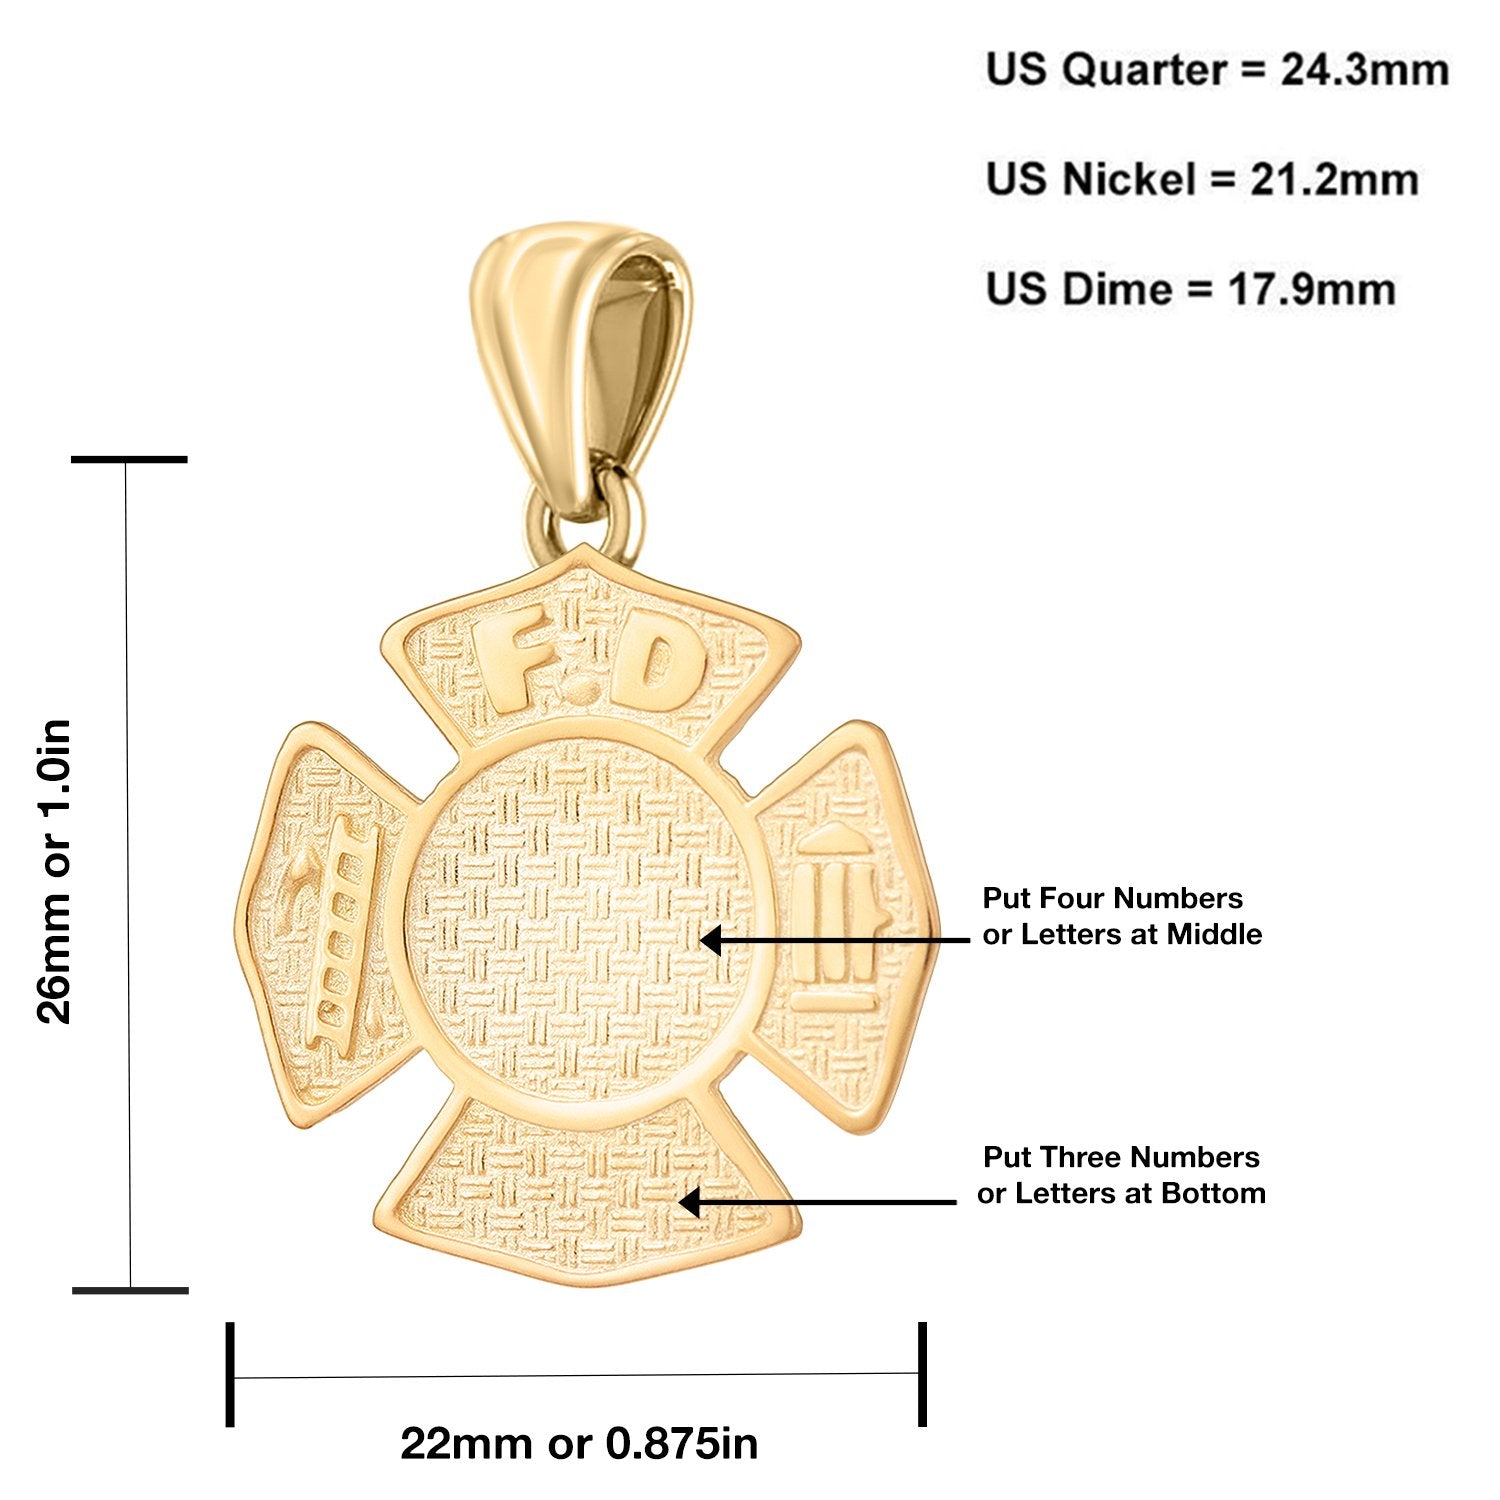 Firefighter Pendant of Gold for Ladies - Size Details